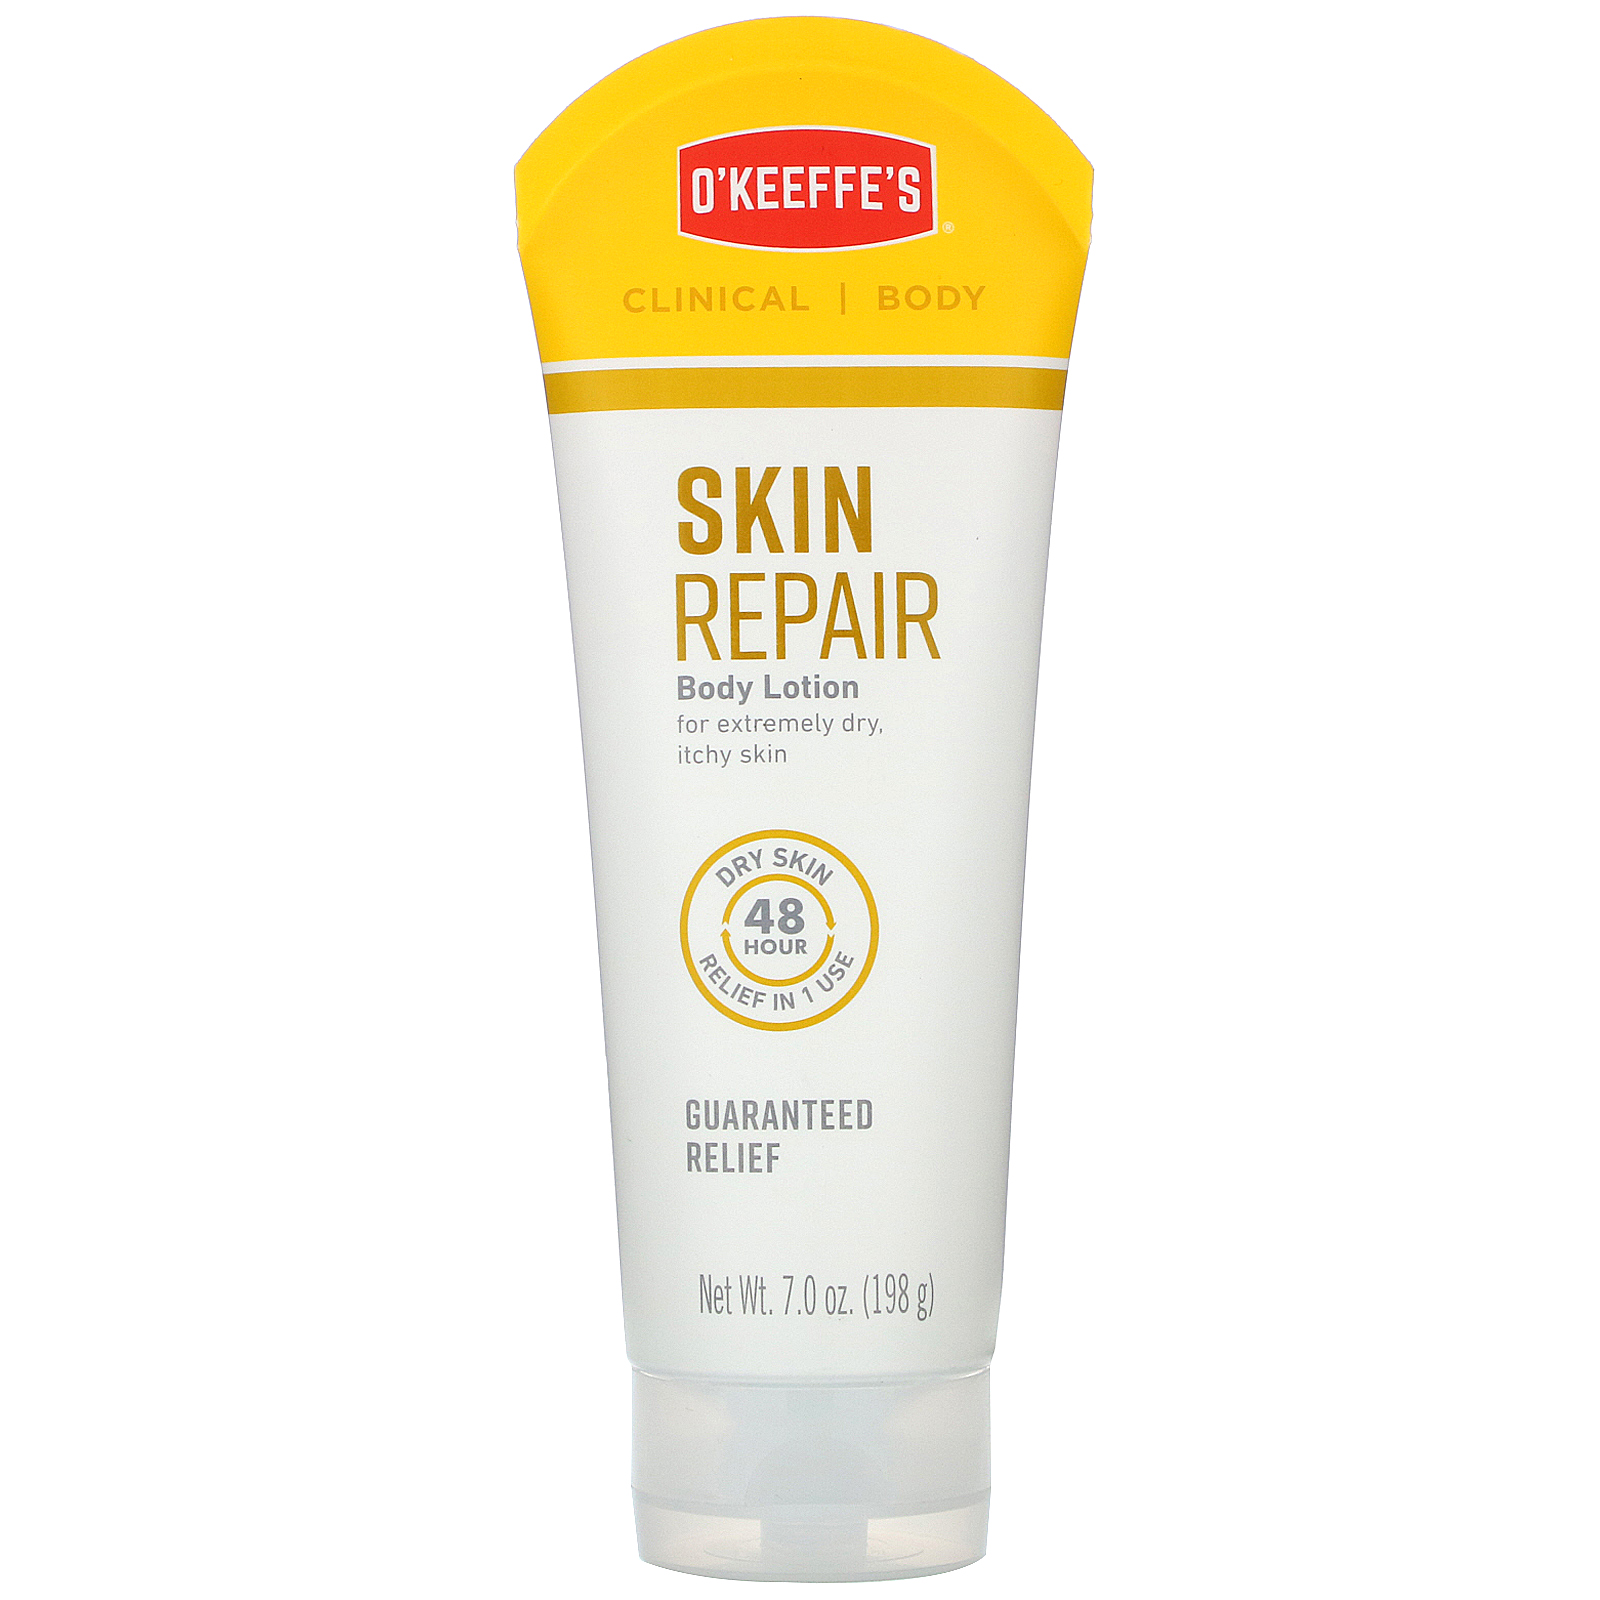 O'Keeffe's, Skin Repair Body Lotion, Unscented, 7 oz (198 g) - iHerb